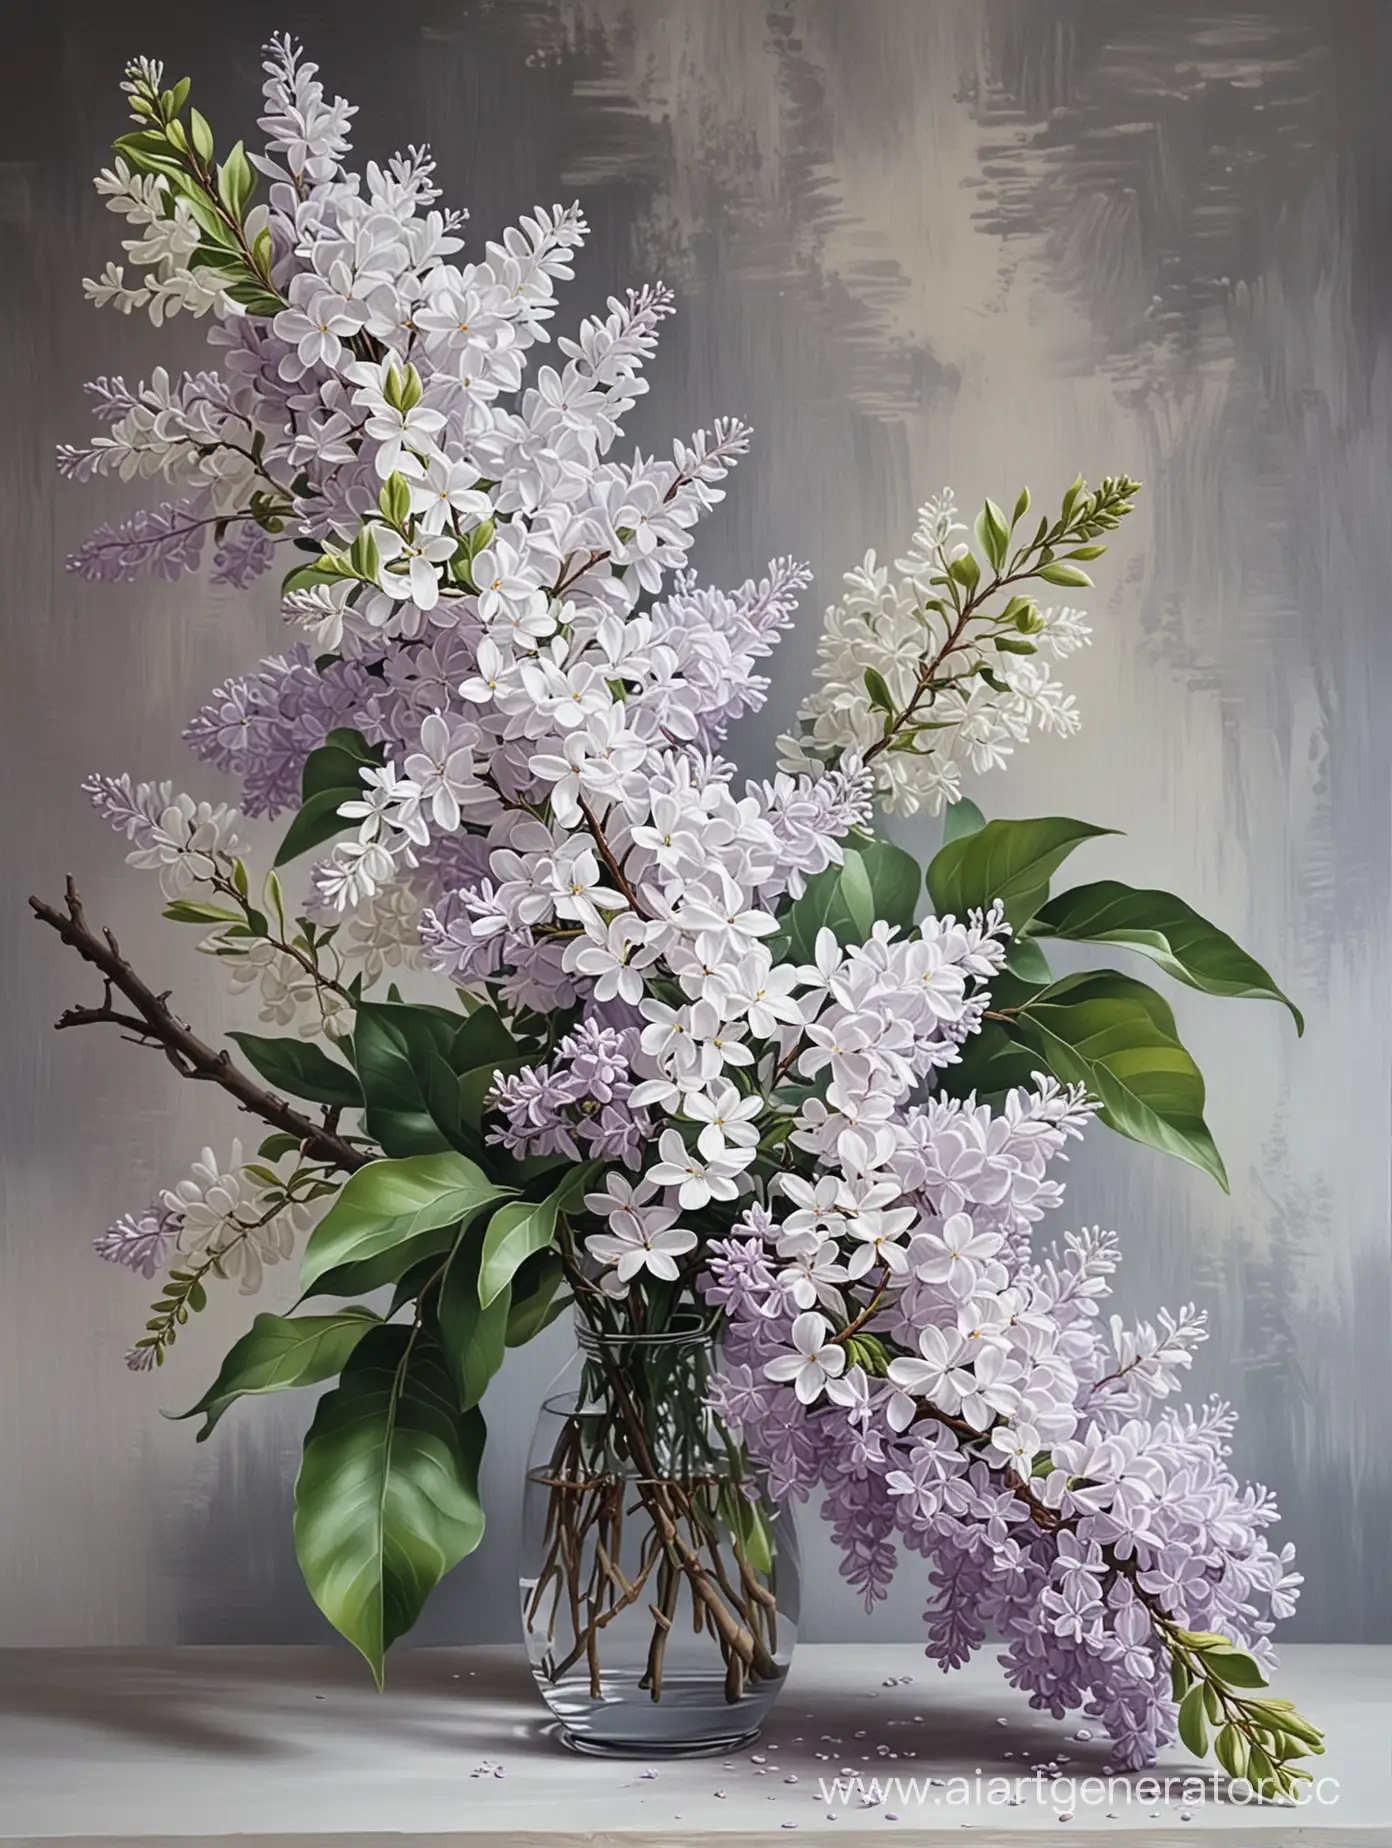 Realistic-Painting-of-a-Blooming-White-Lilac-Branch